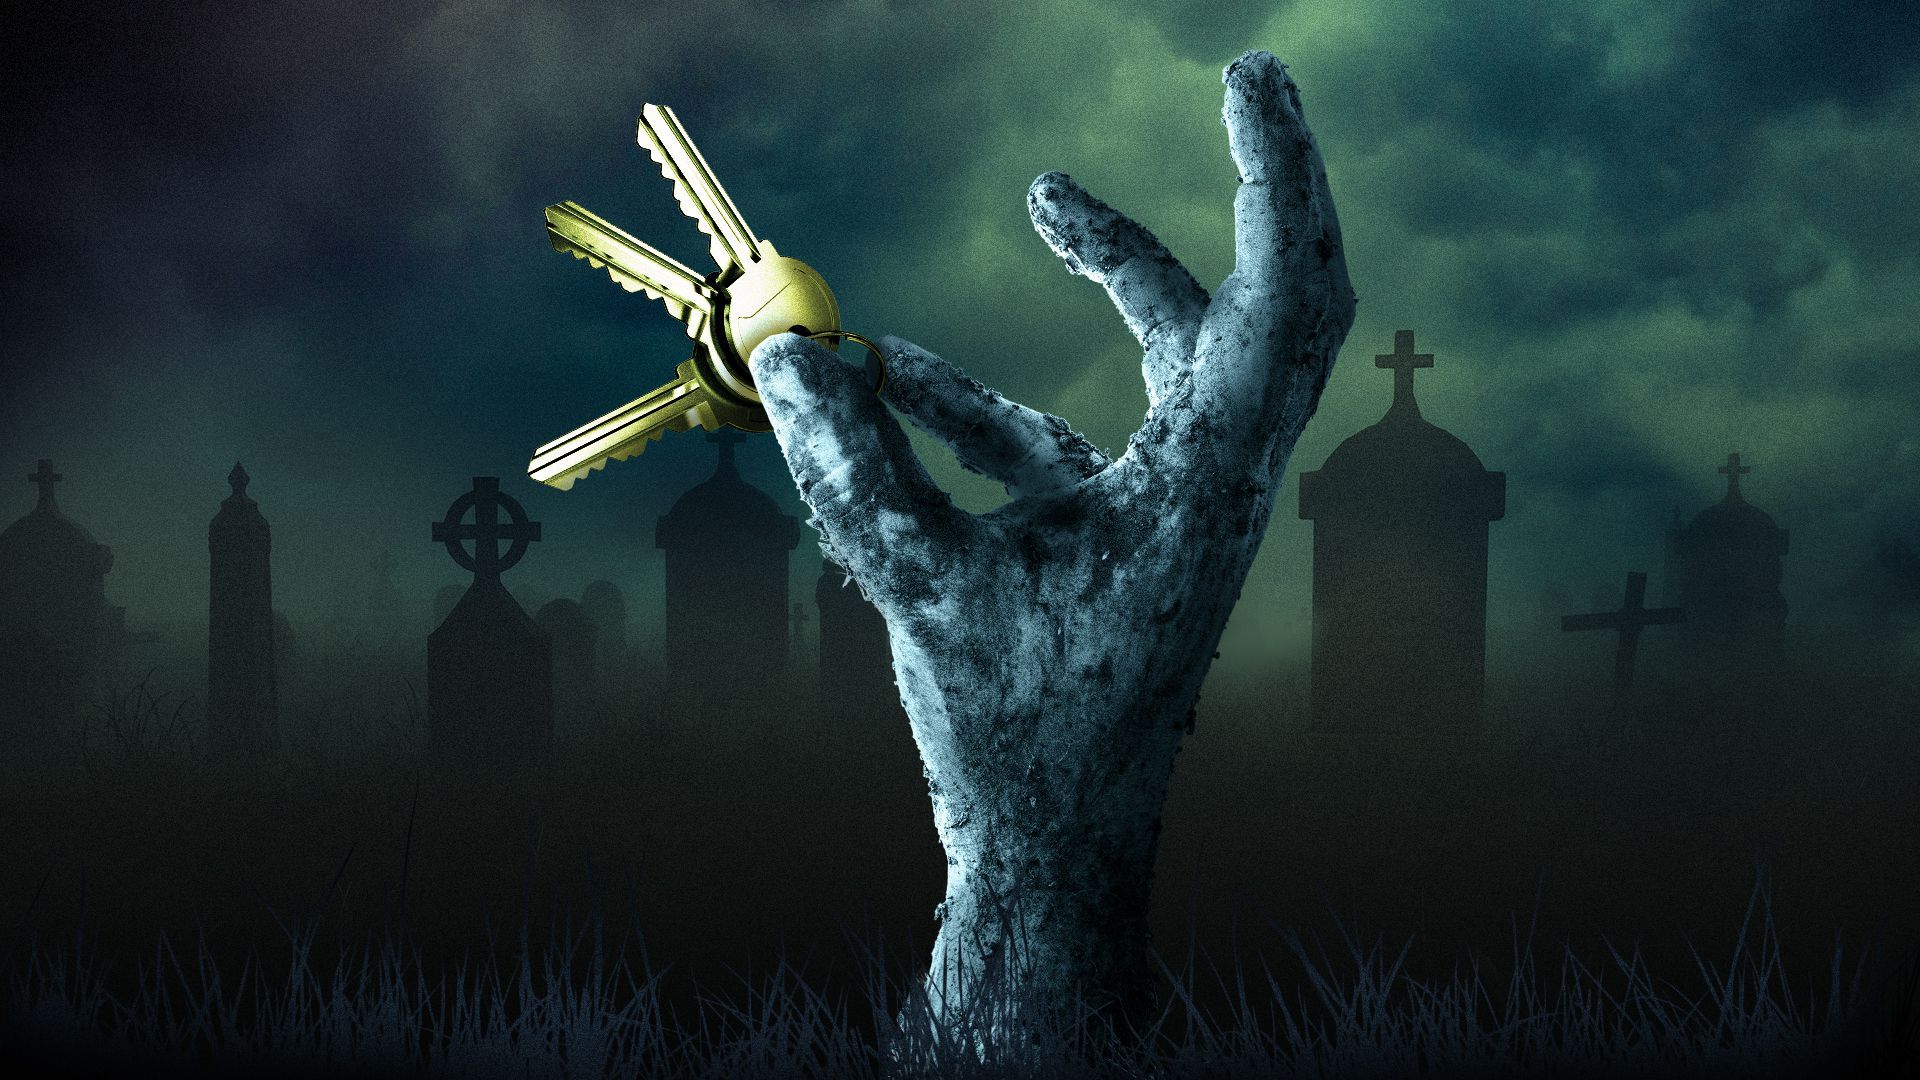 Illustration of a zombie's hand emerging from a grave, clutching keys.